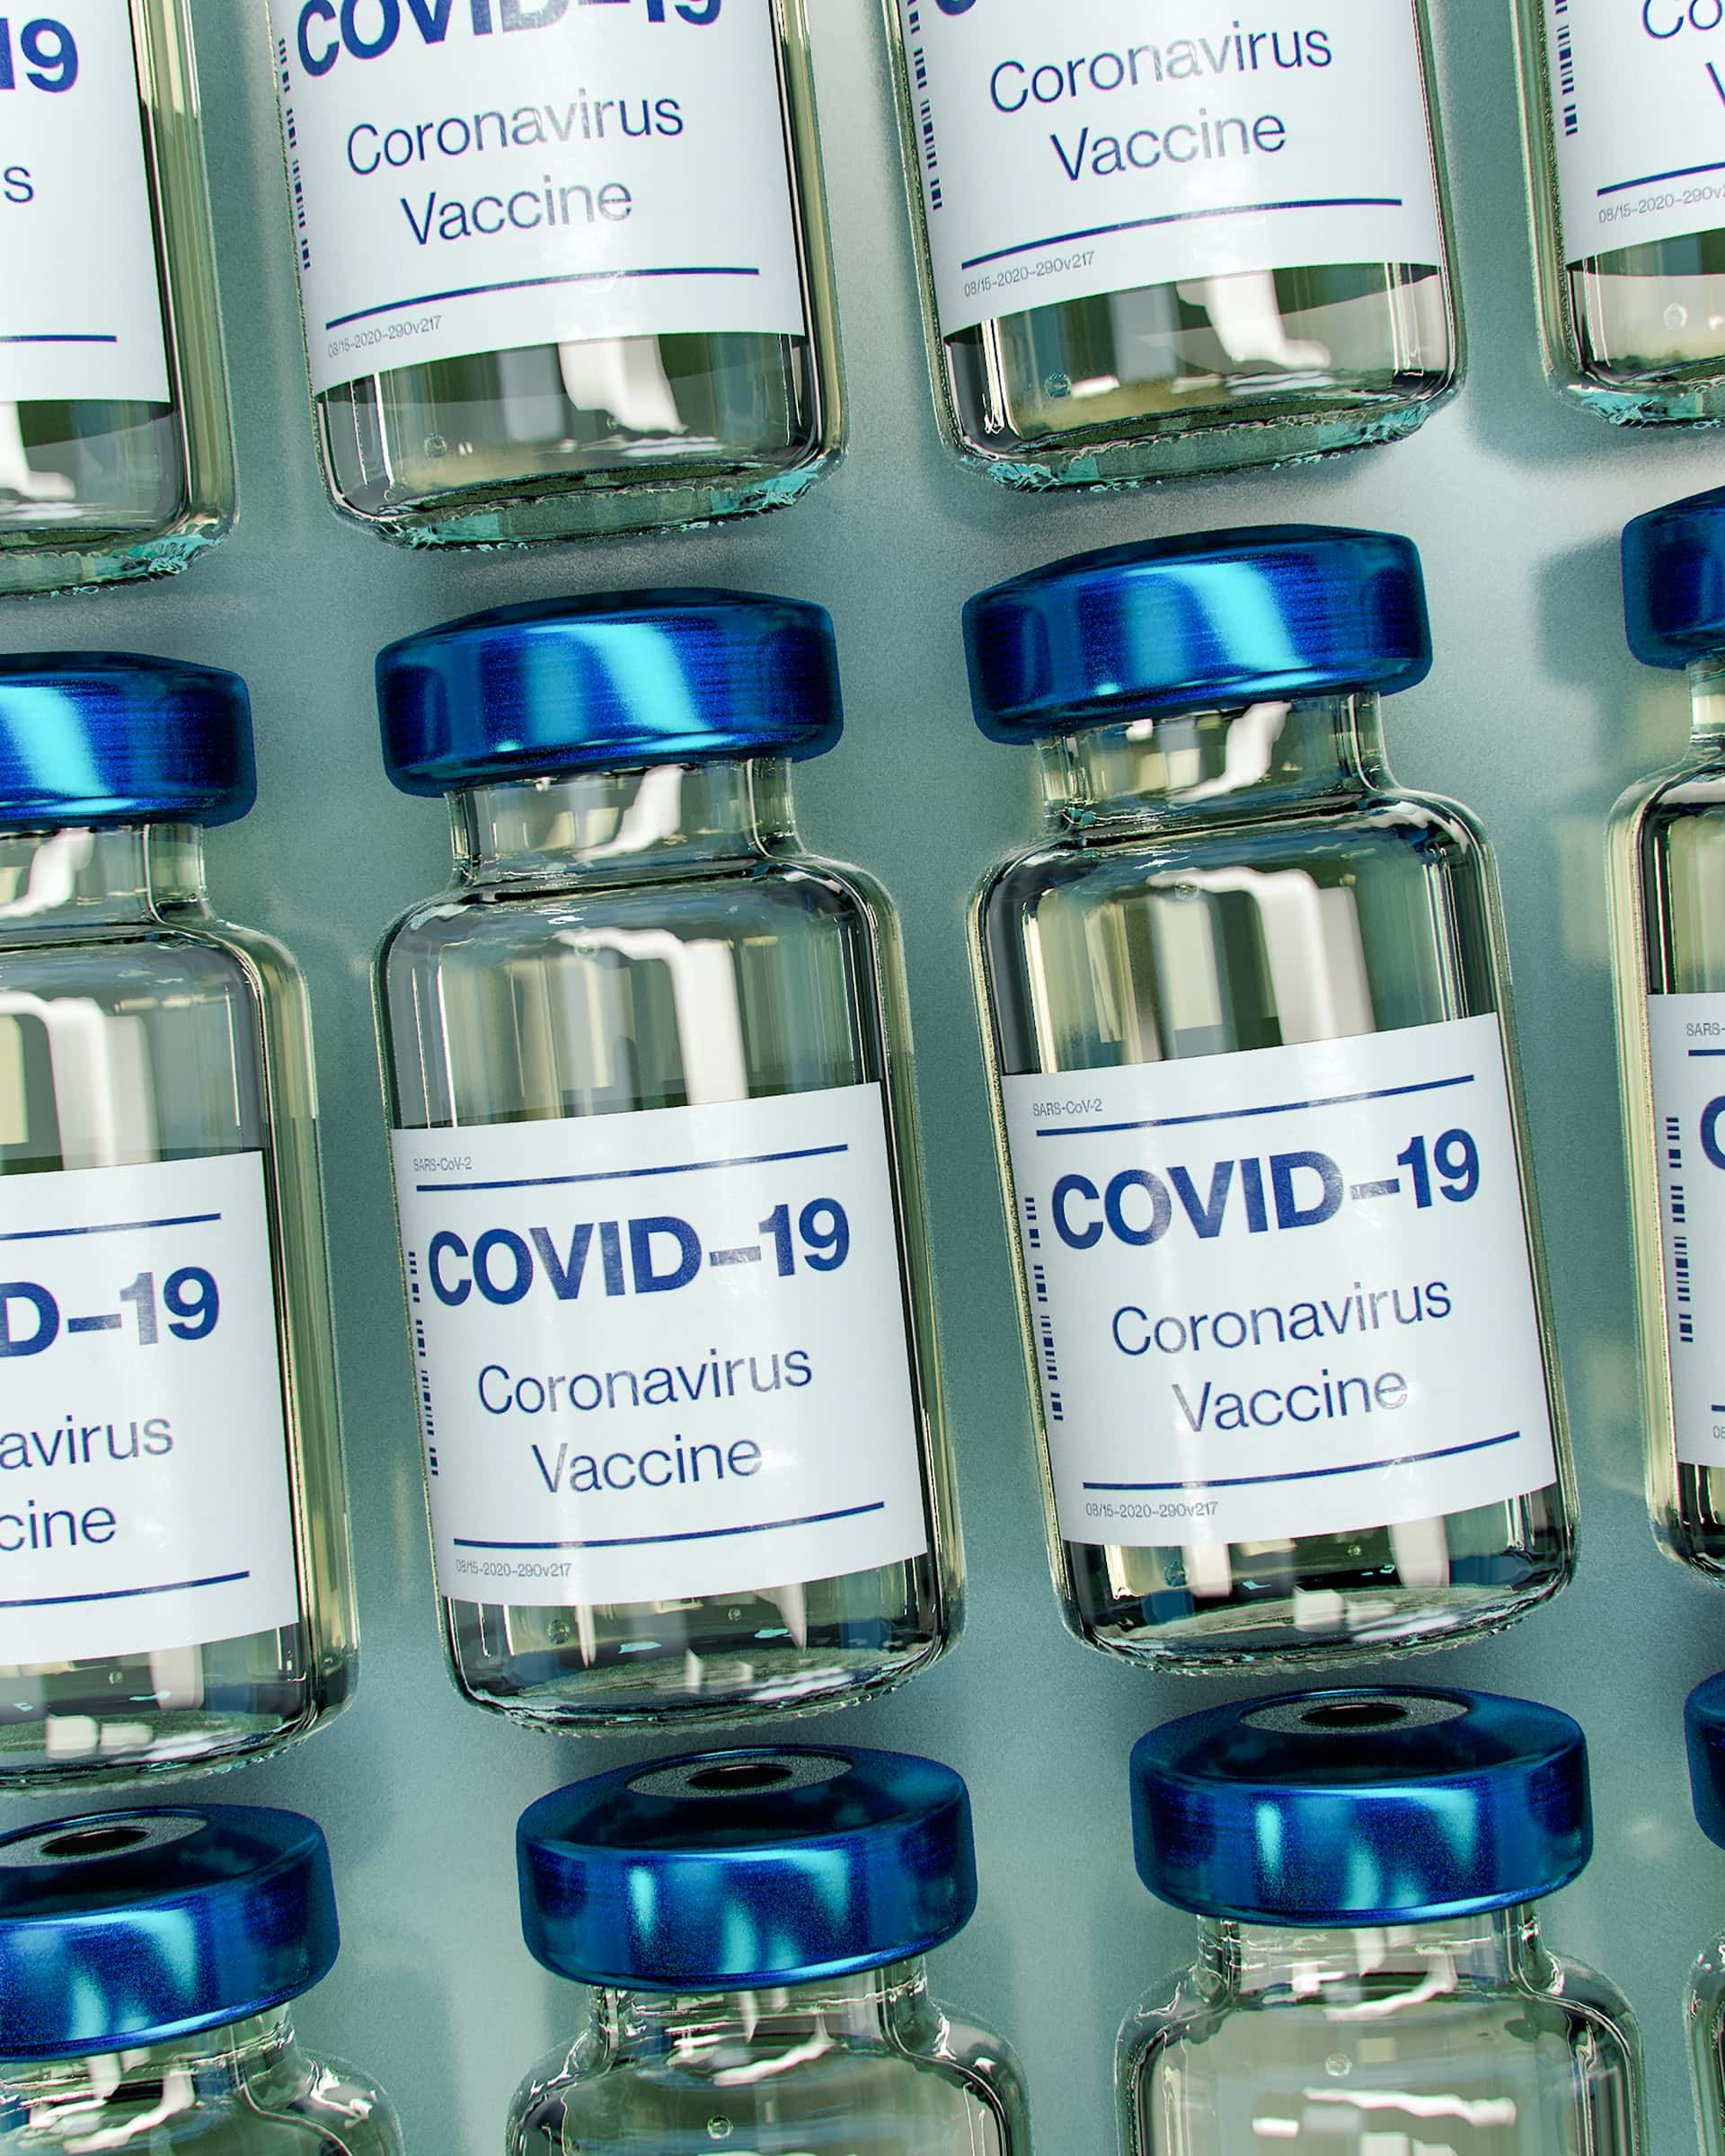 Featured image for “Covid-19 vaccine approved for children today – what if parents don’t agree?”